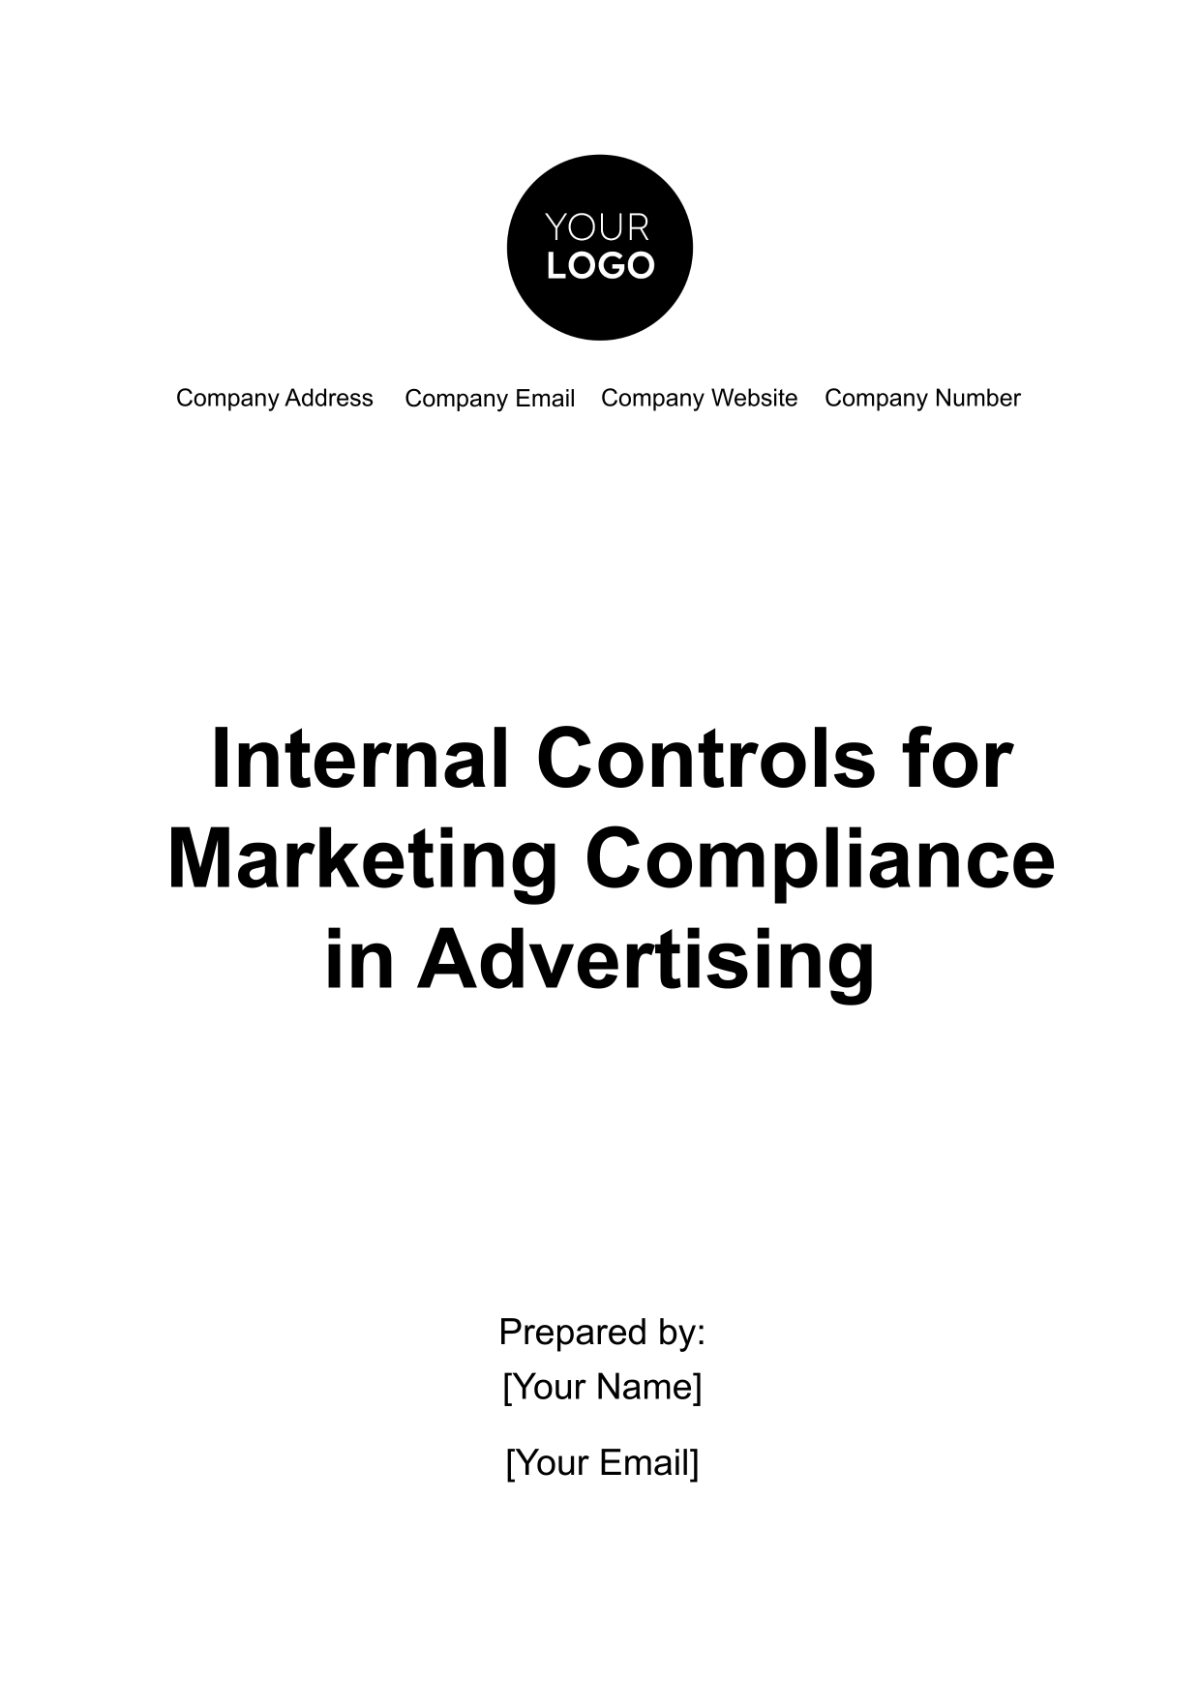 Internal Controls for Marketing Compliance in Advertising Template